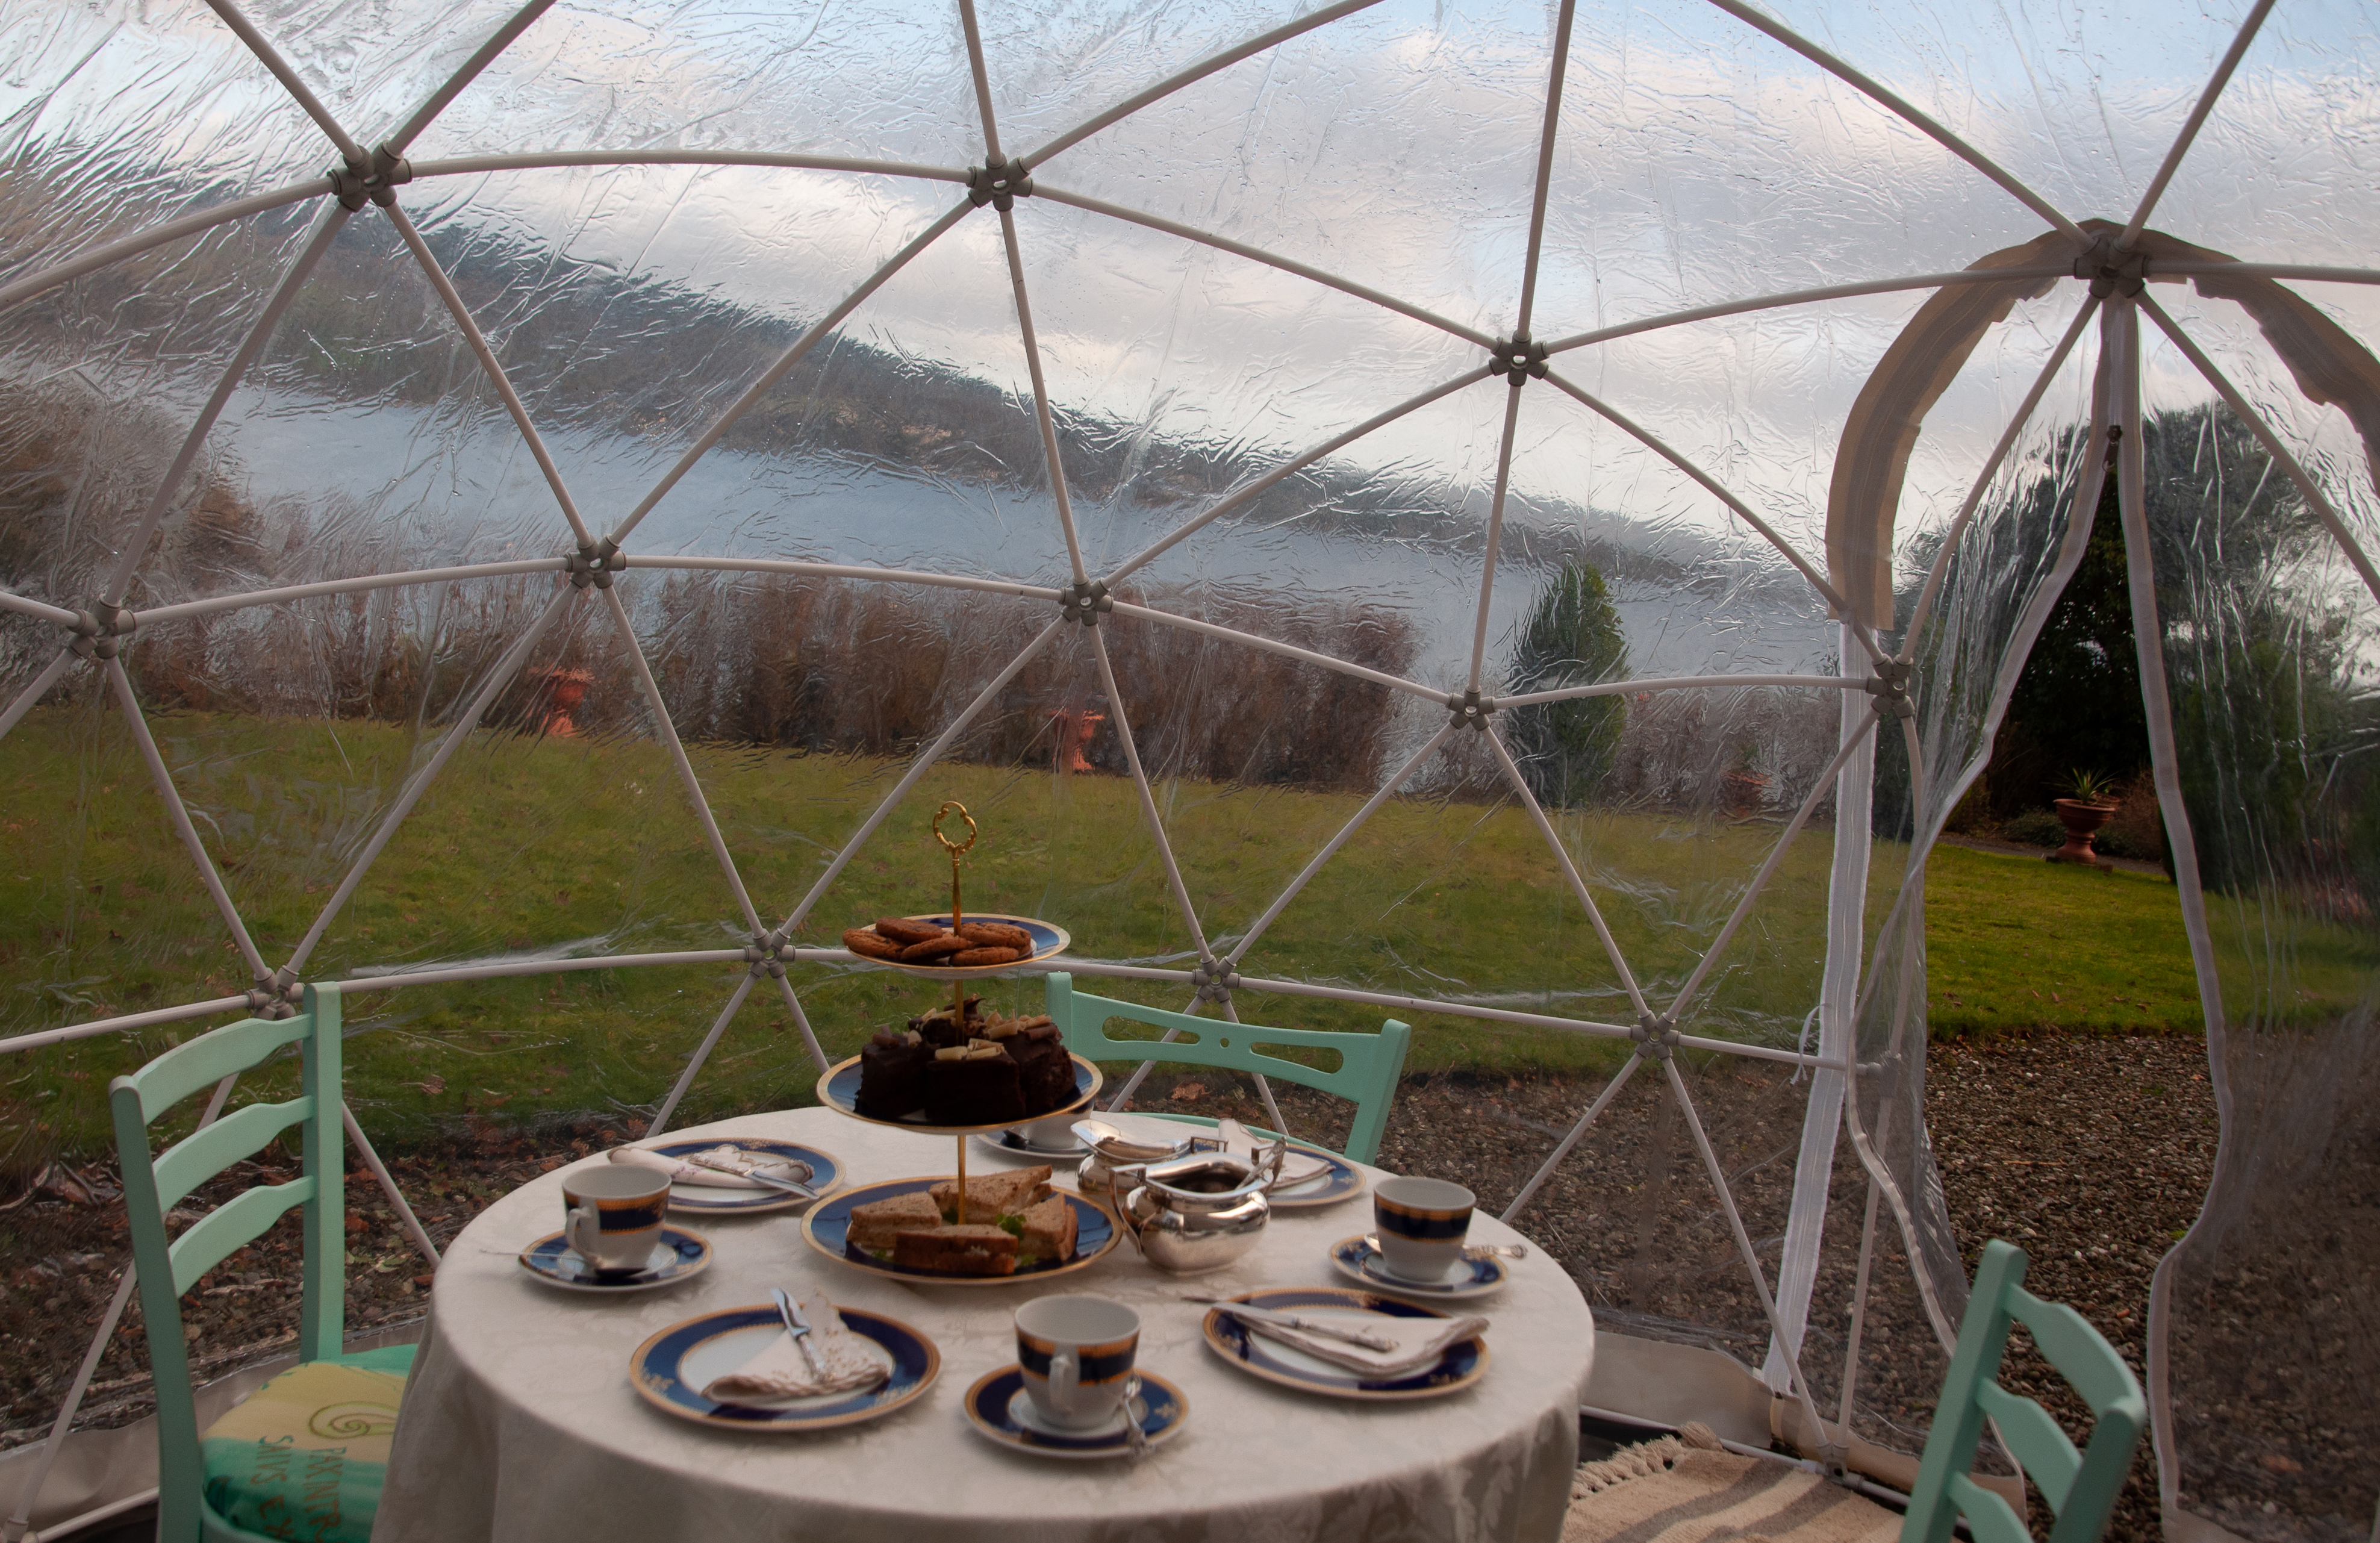 Afternoon Tea in a dome